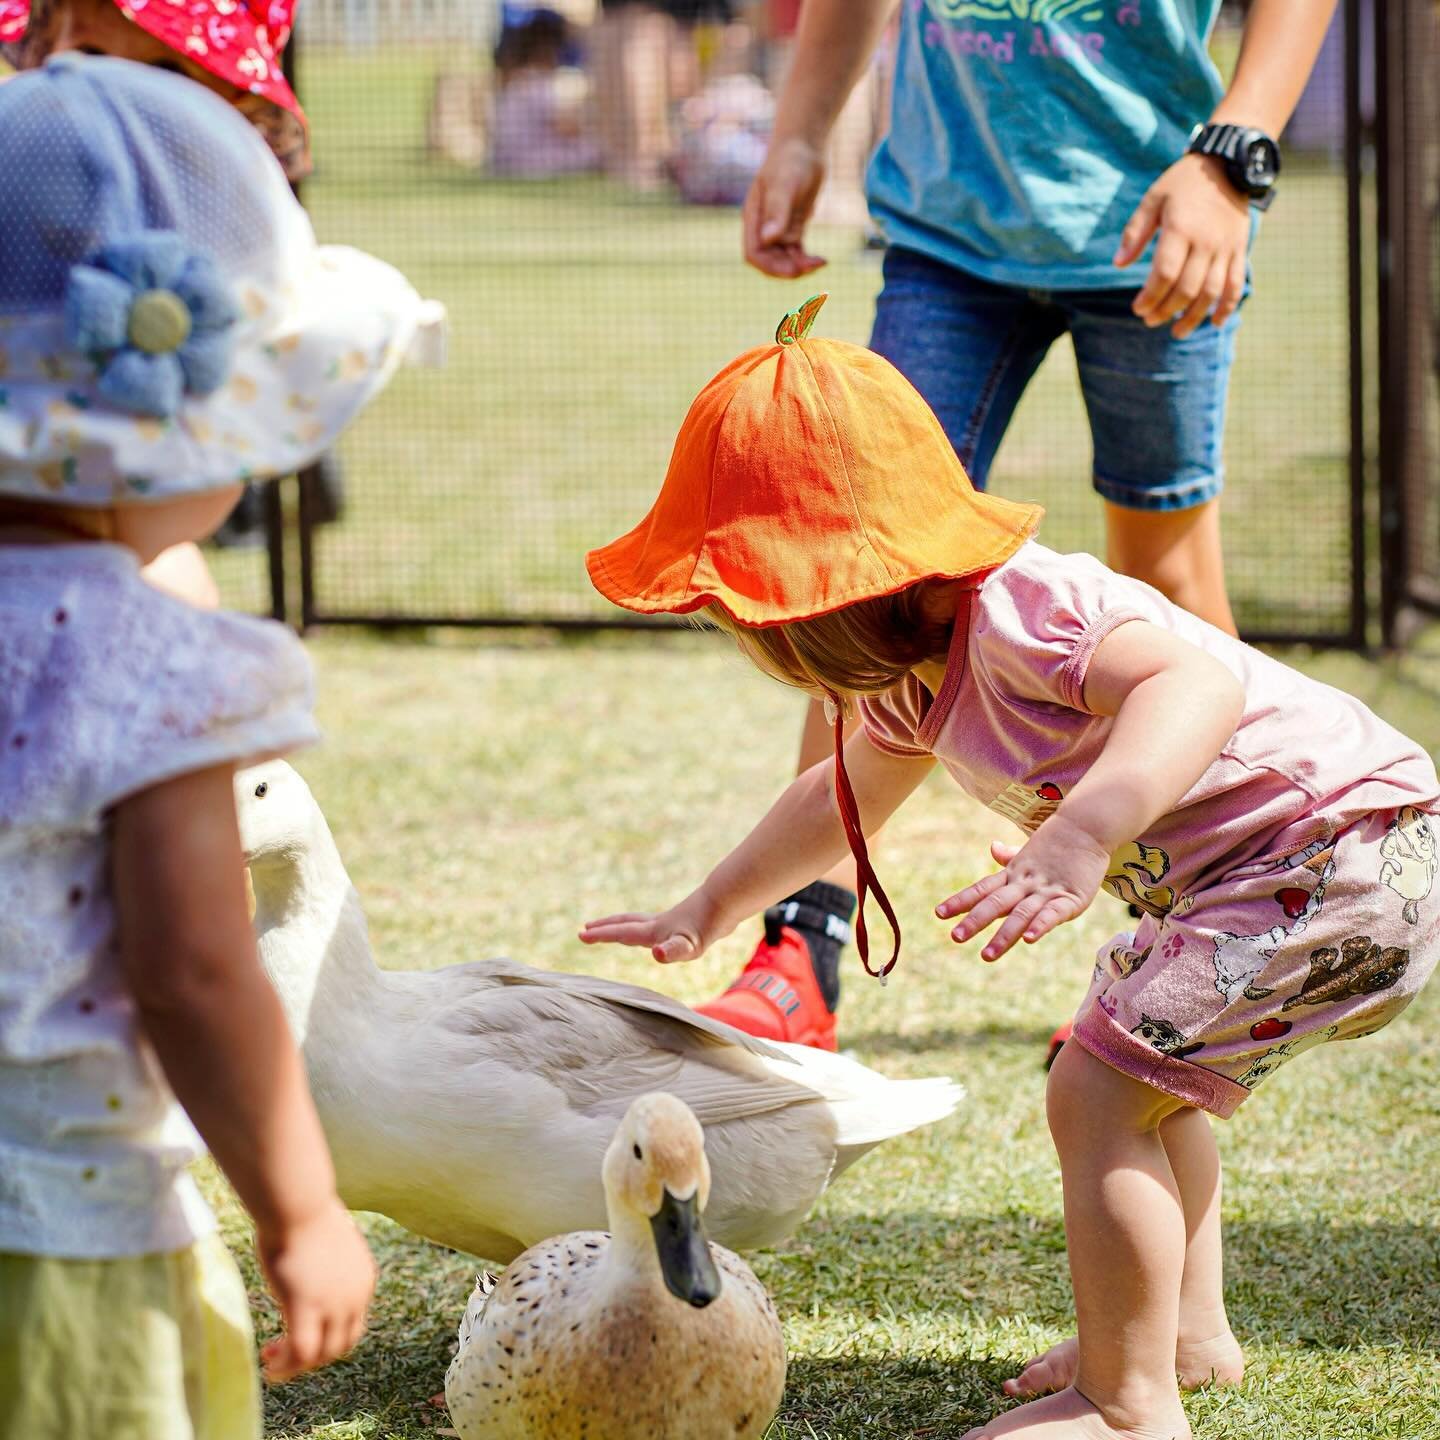 🍎 APPLE FEST PHOTOS 🍎
A big thank you to @katts_eye_photography_1 for capturing the magic of the day 📸
We&rsquo;ve got plenty more photos to upload, but here&rsquo;s a start! 

#donnybrook #donnybrookwa #donnybrookapplefestival #donnybrookfestival